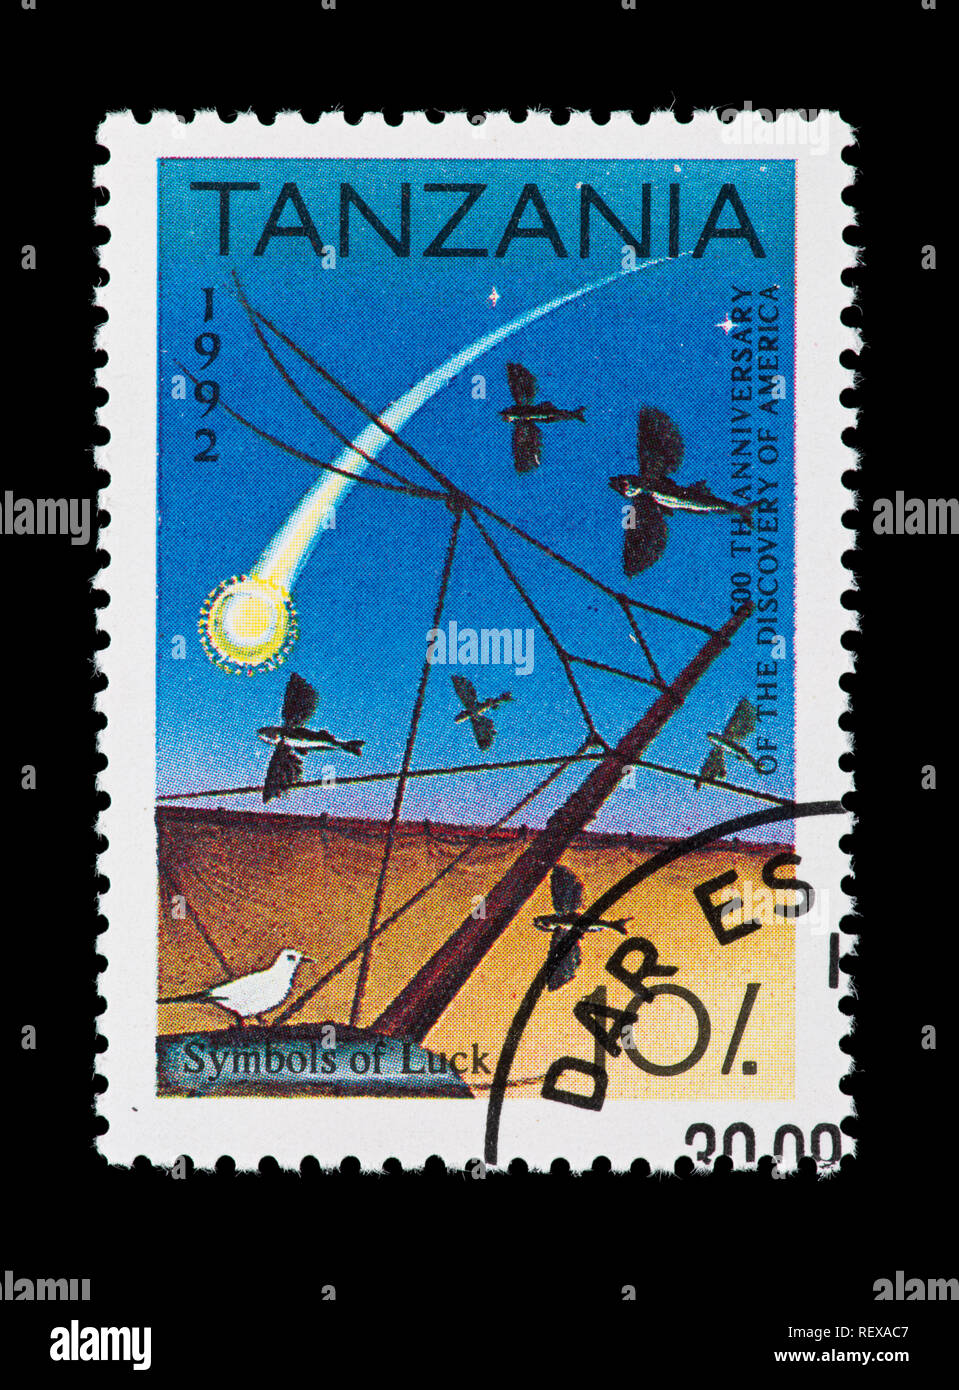 Postage stamp from Tanzania depicting various symbols of luck, issued for the 500th anniversary of the discovery of the Americas Stock Photo